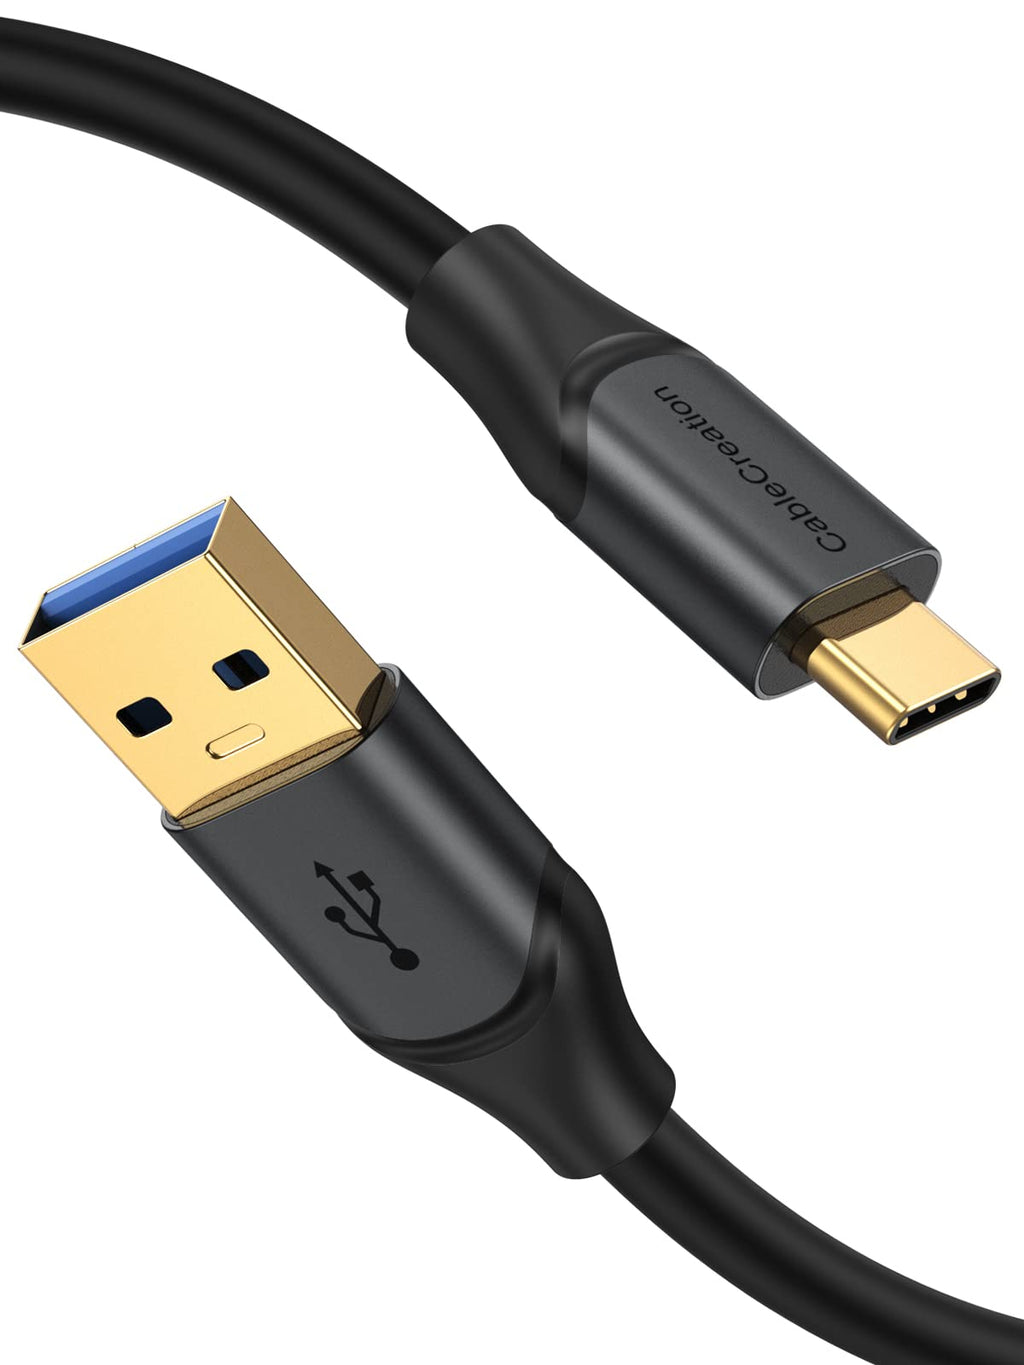  [AUSTRALIA] - CableCreation Short USB to USB C Cable 1.6FT, USB C Data Transfer Cable 3.2 Gen2 10Gbps USB A to C Data Cable, Fast Charging Cable Type C 60W 20V/3A for USB C External SSD Quest 2 Laptop etc 1.6FT/0.5m